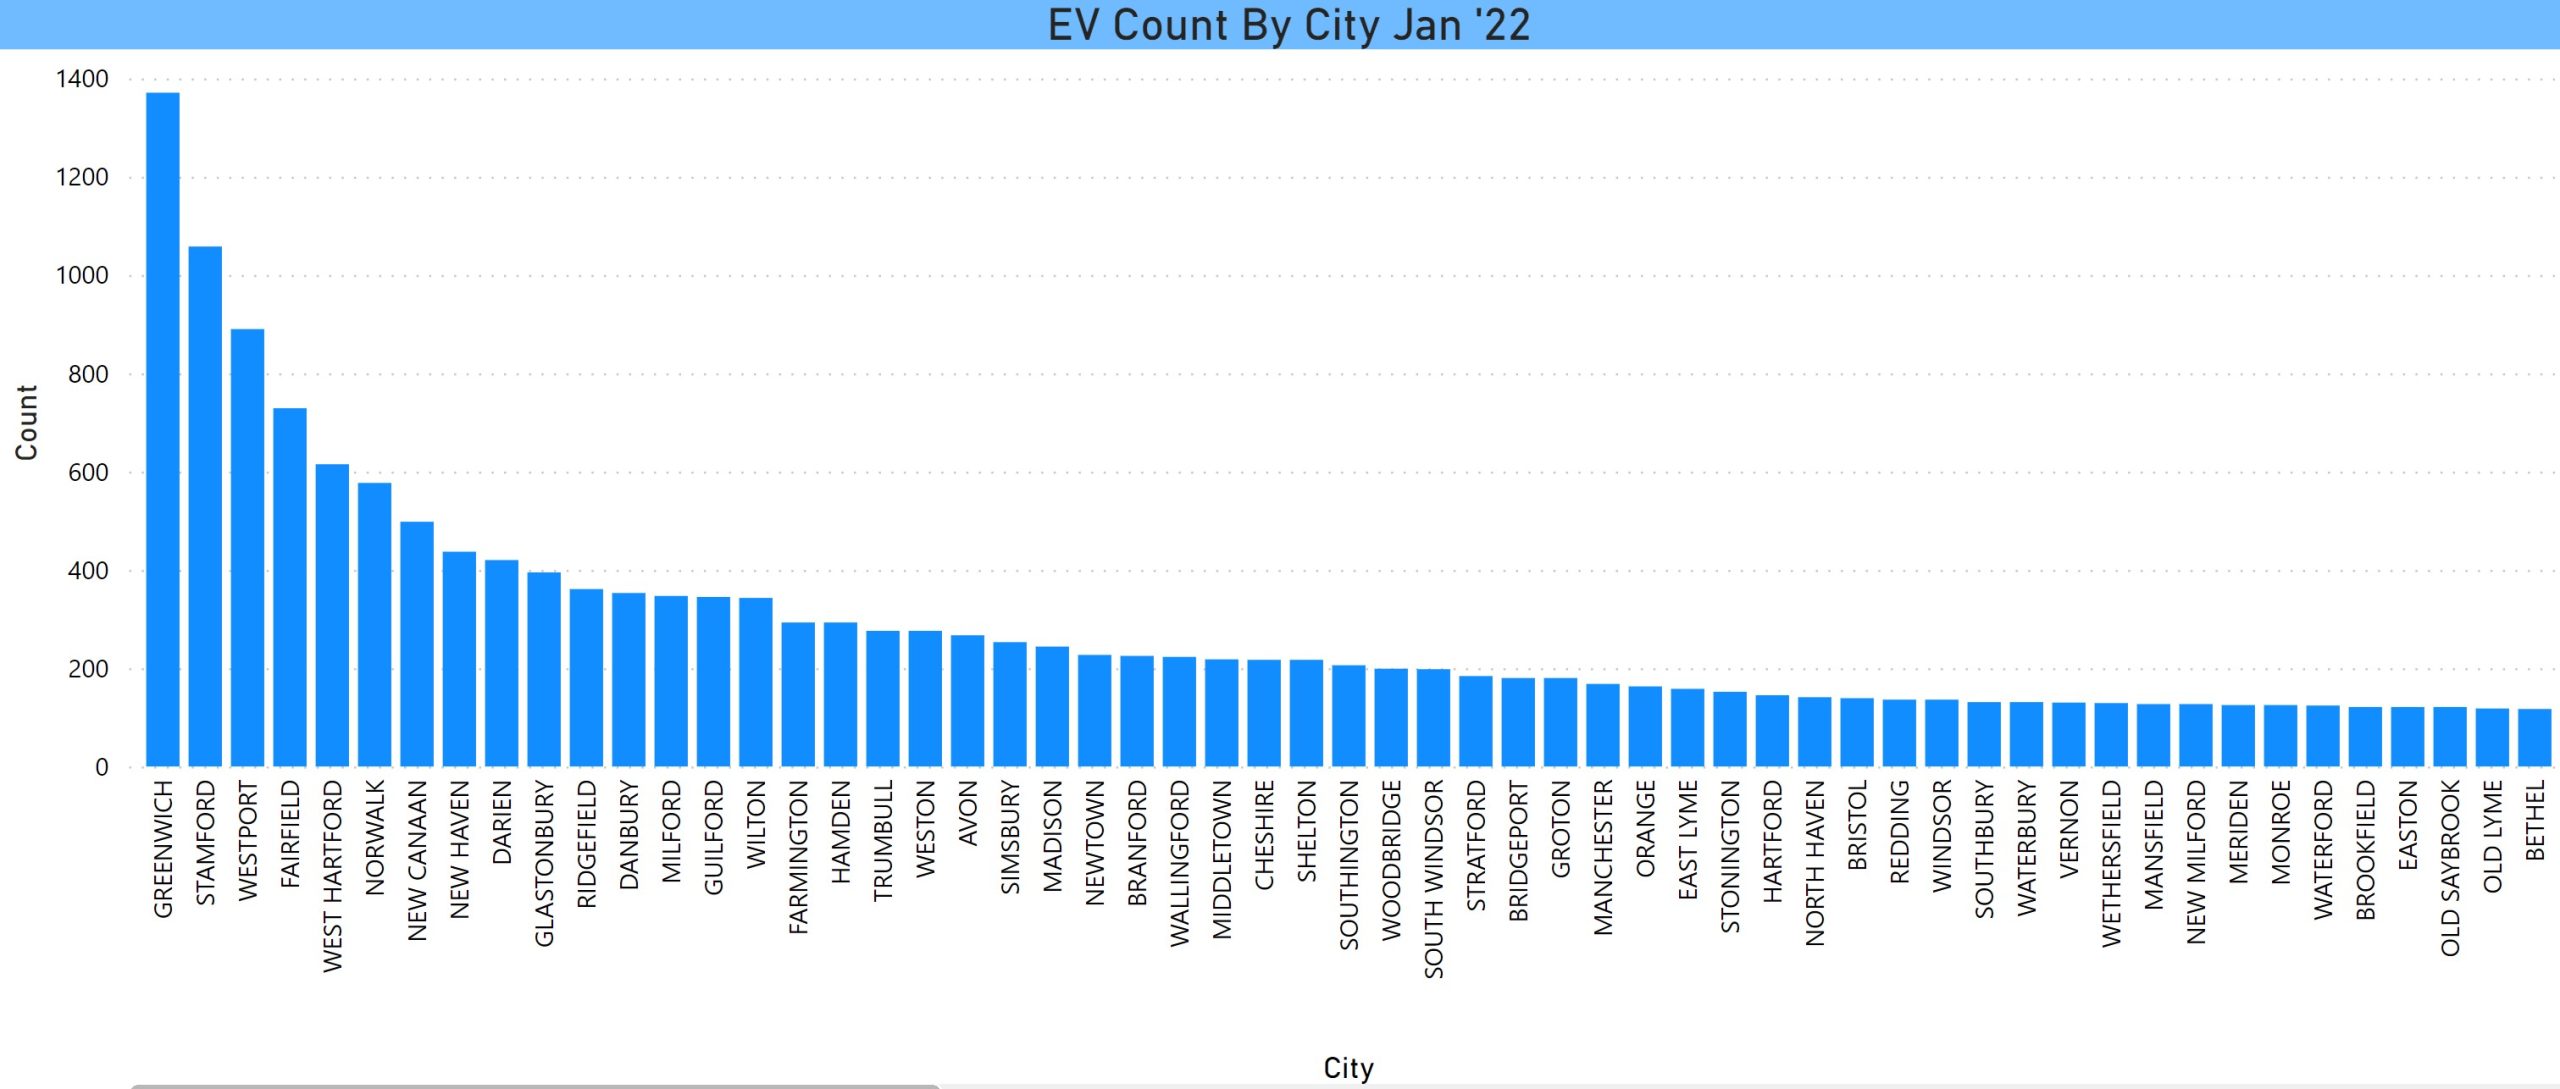 EV Count by City in CT Jan 2022